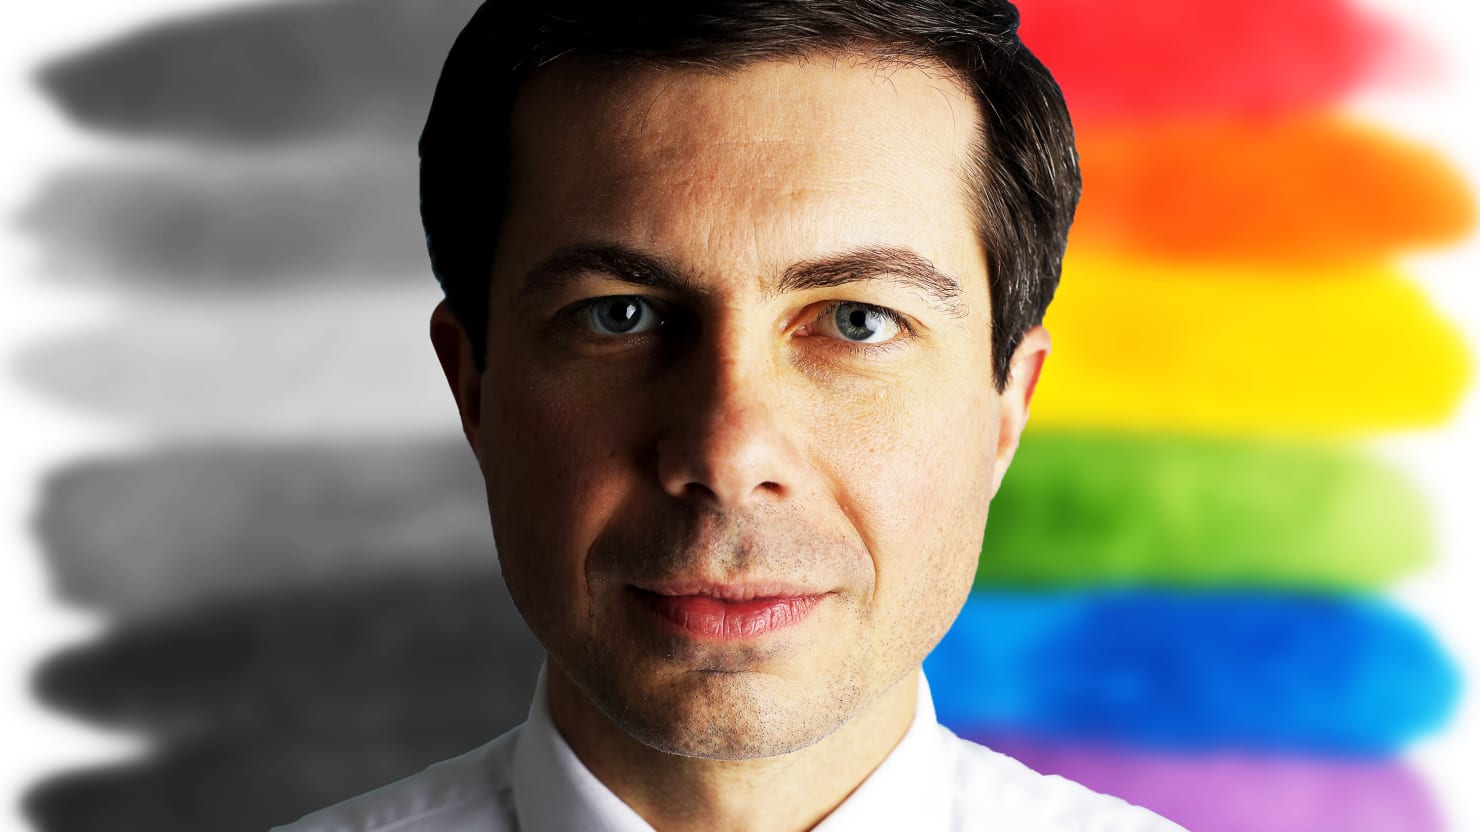 Mayor Pete & Chasten Buttigieg Are Courting LGBT Voters Like No Other 2020 Candidates Can1480 x 832